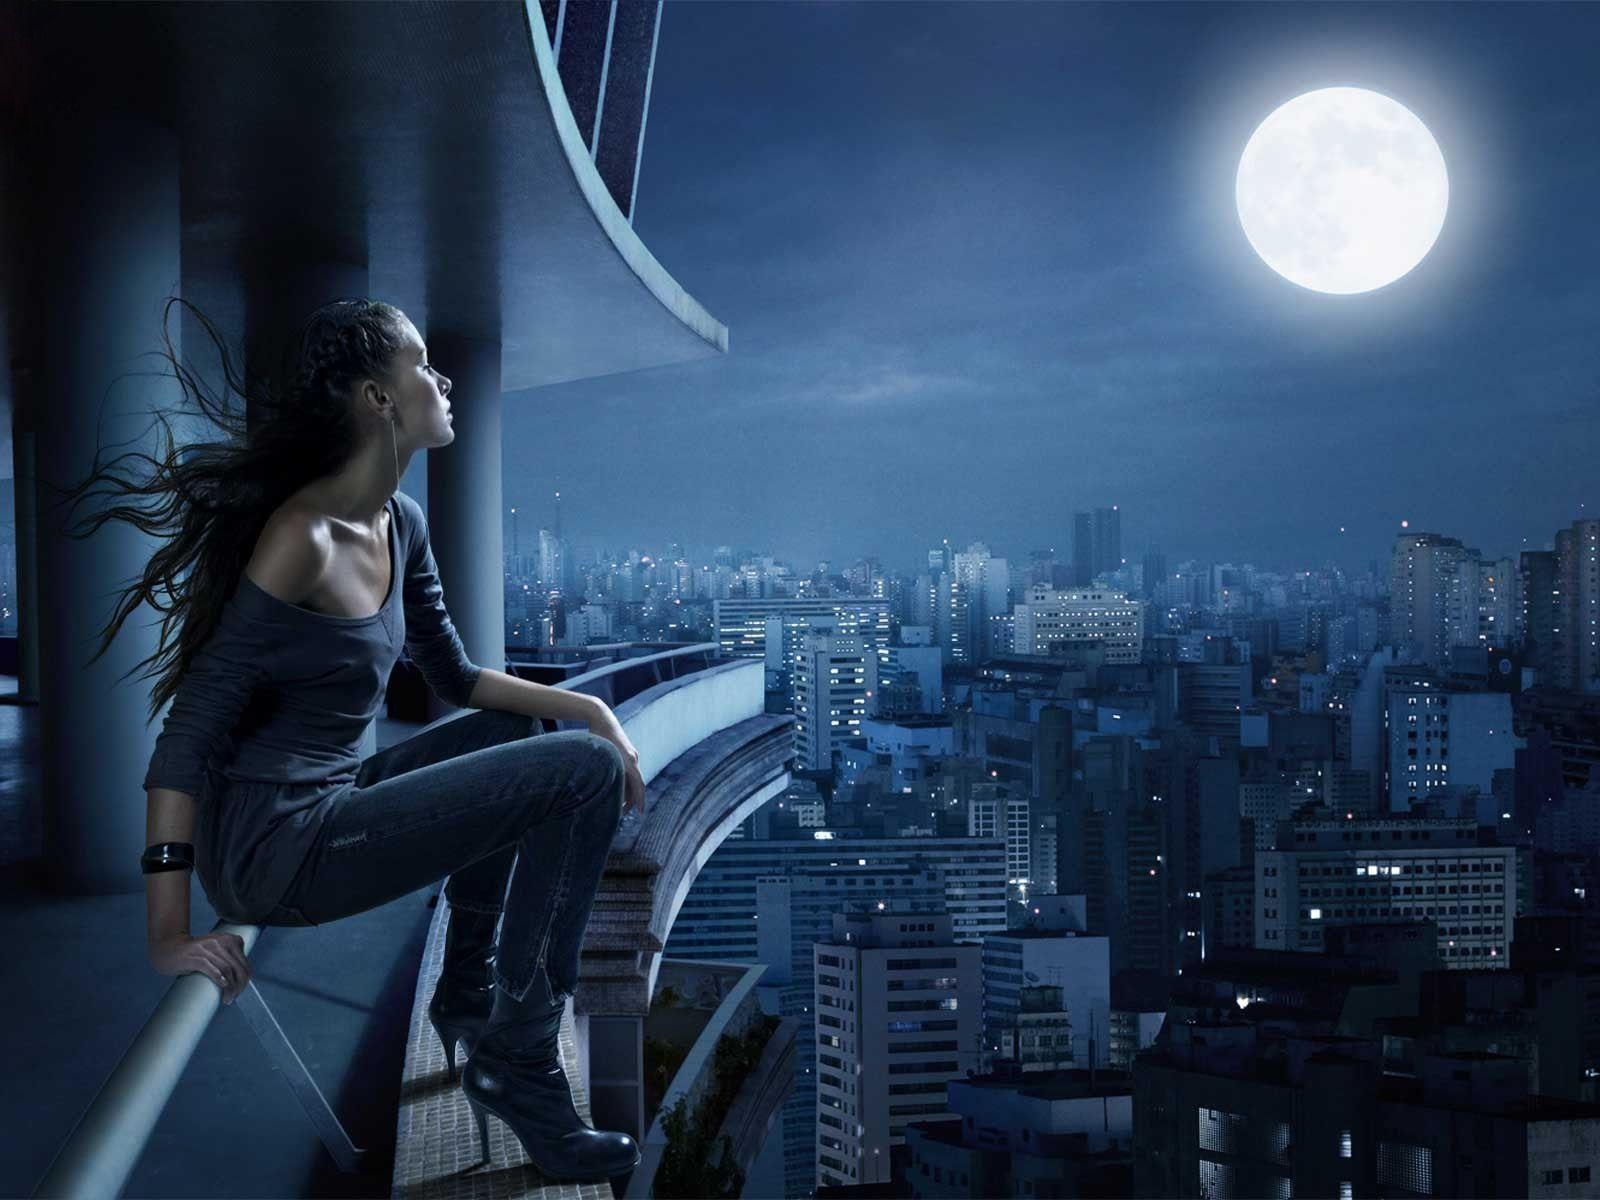 Sweet Lonely Girl wallpaper looking at moon. Inspiration